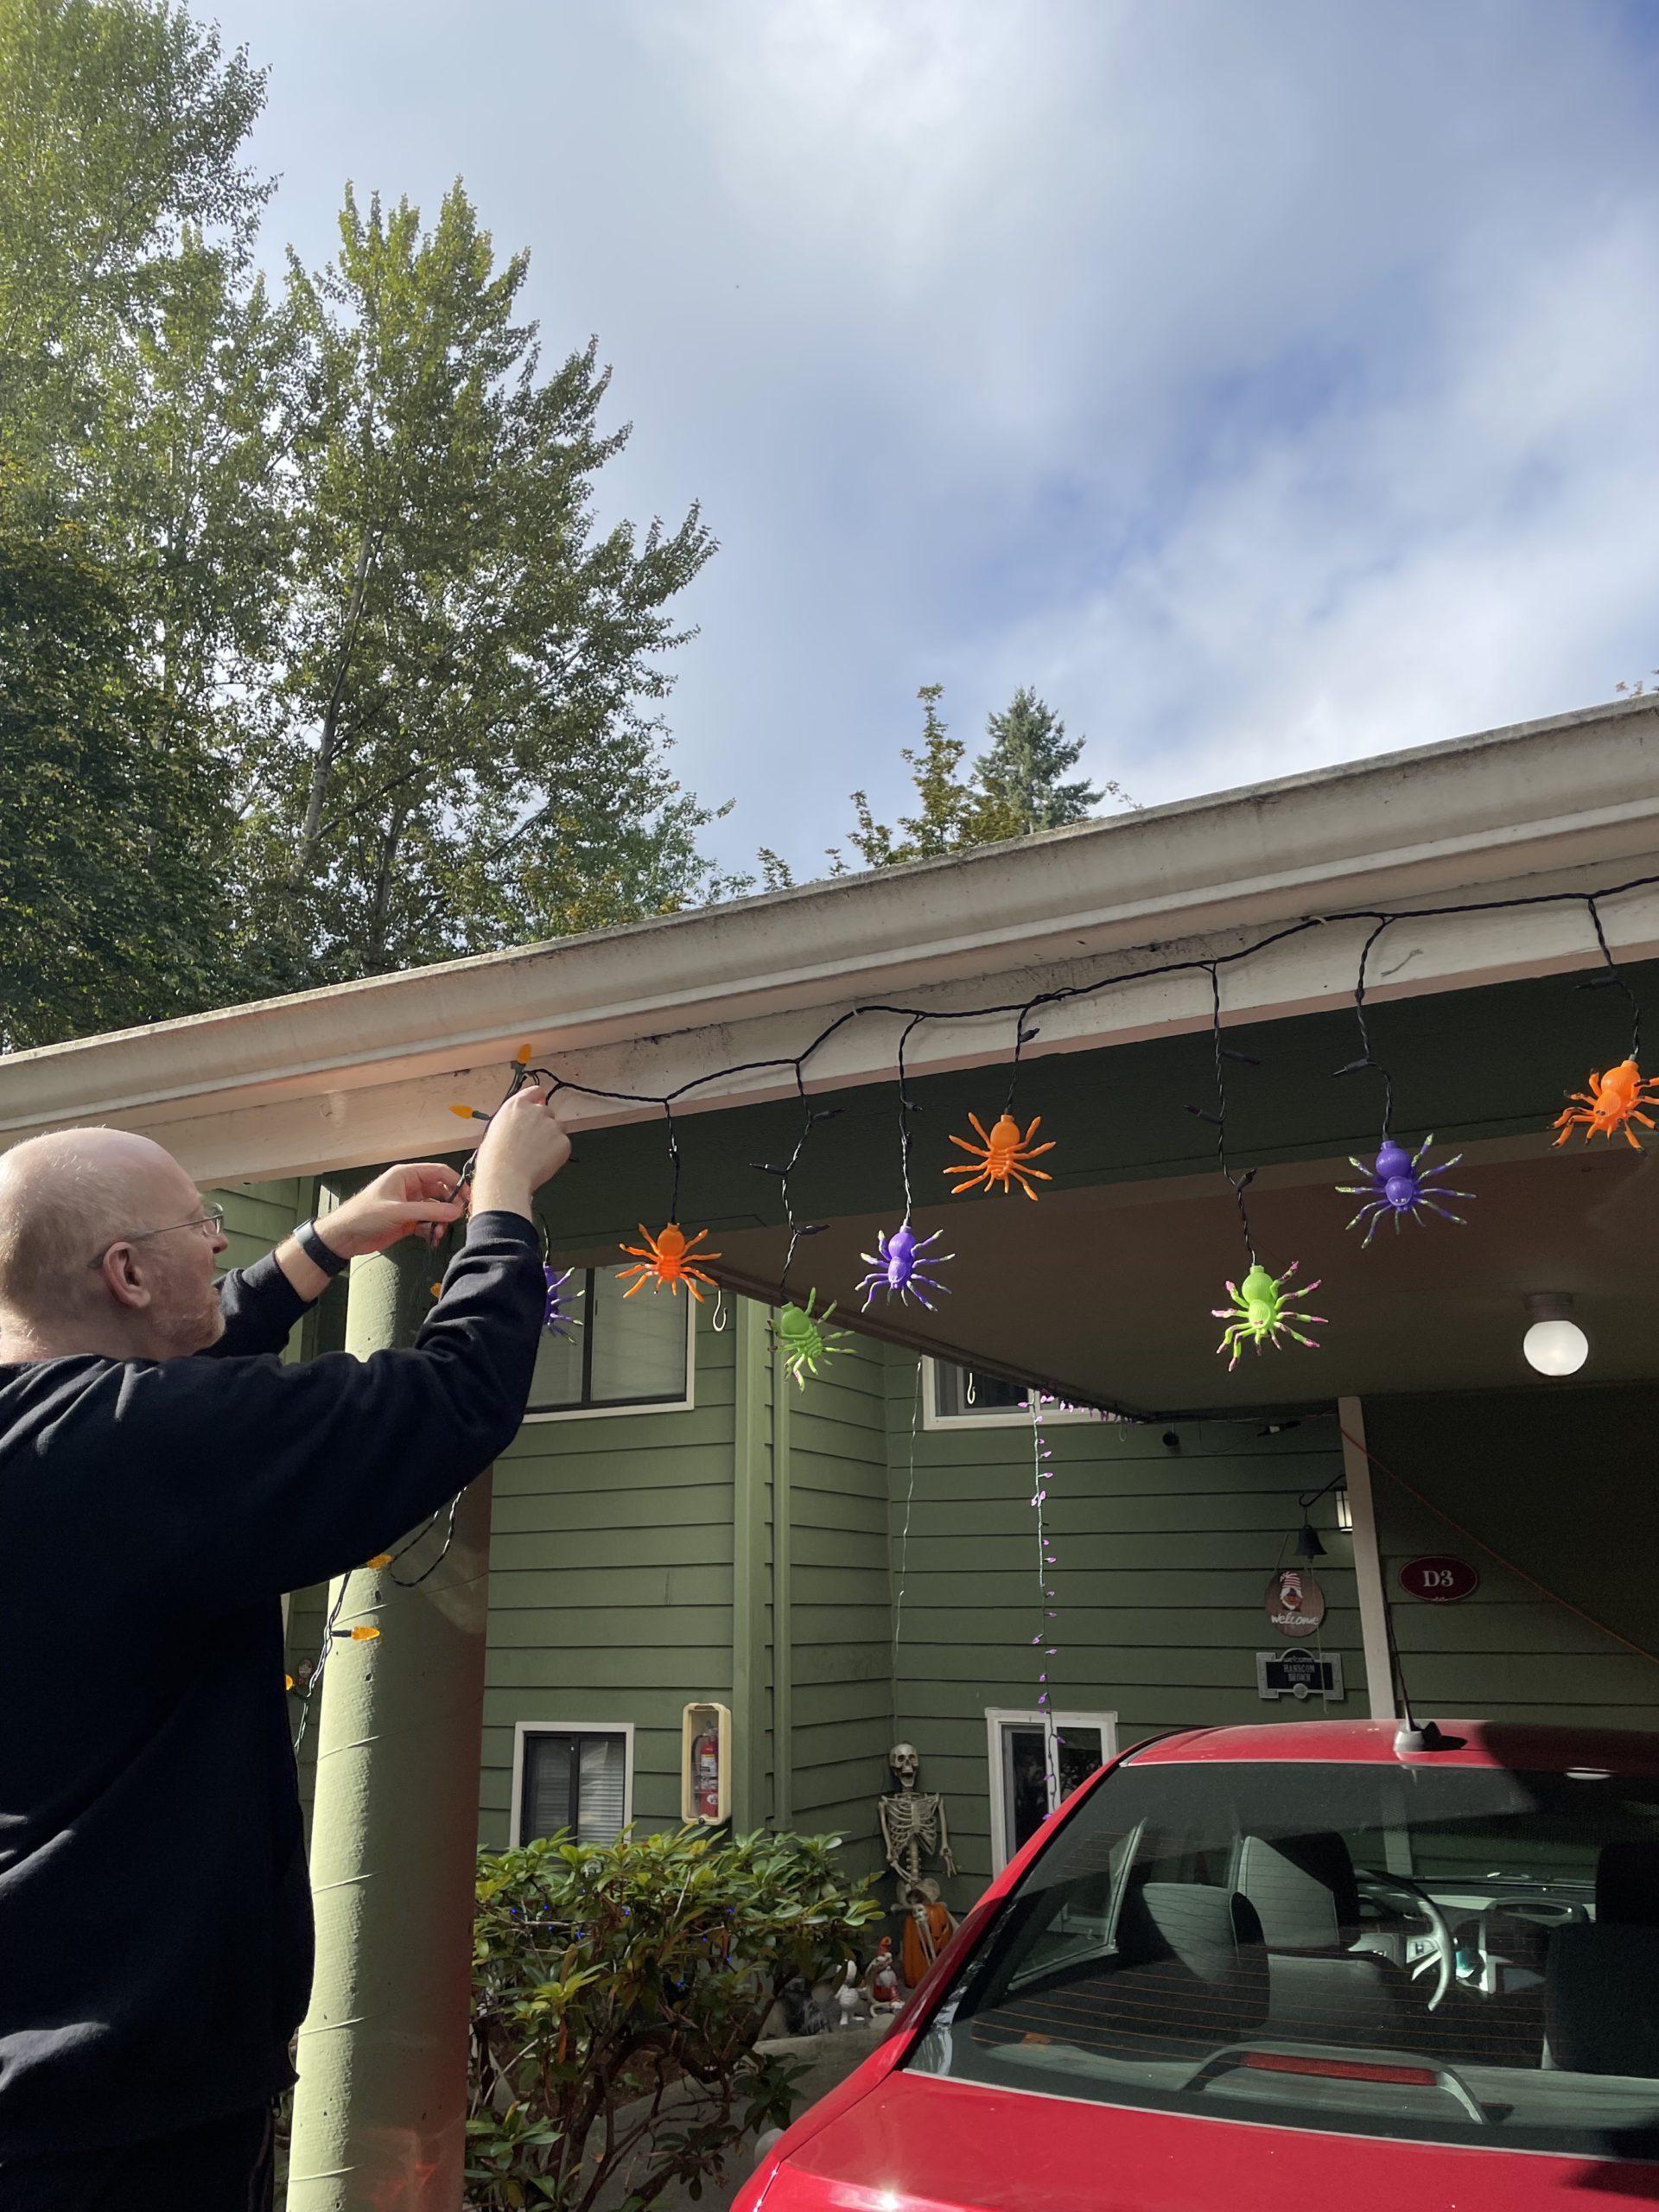 Me hanging Halloween lights with orange, green, and purple spiders from the carport in front of our house.